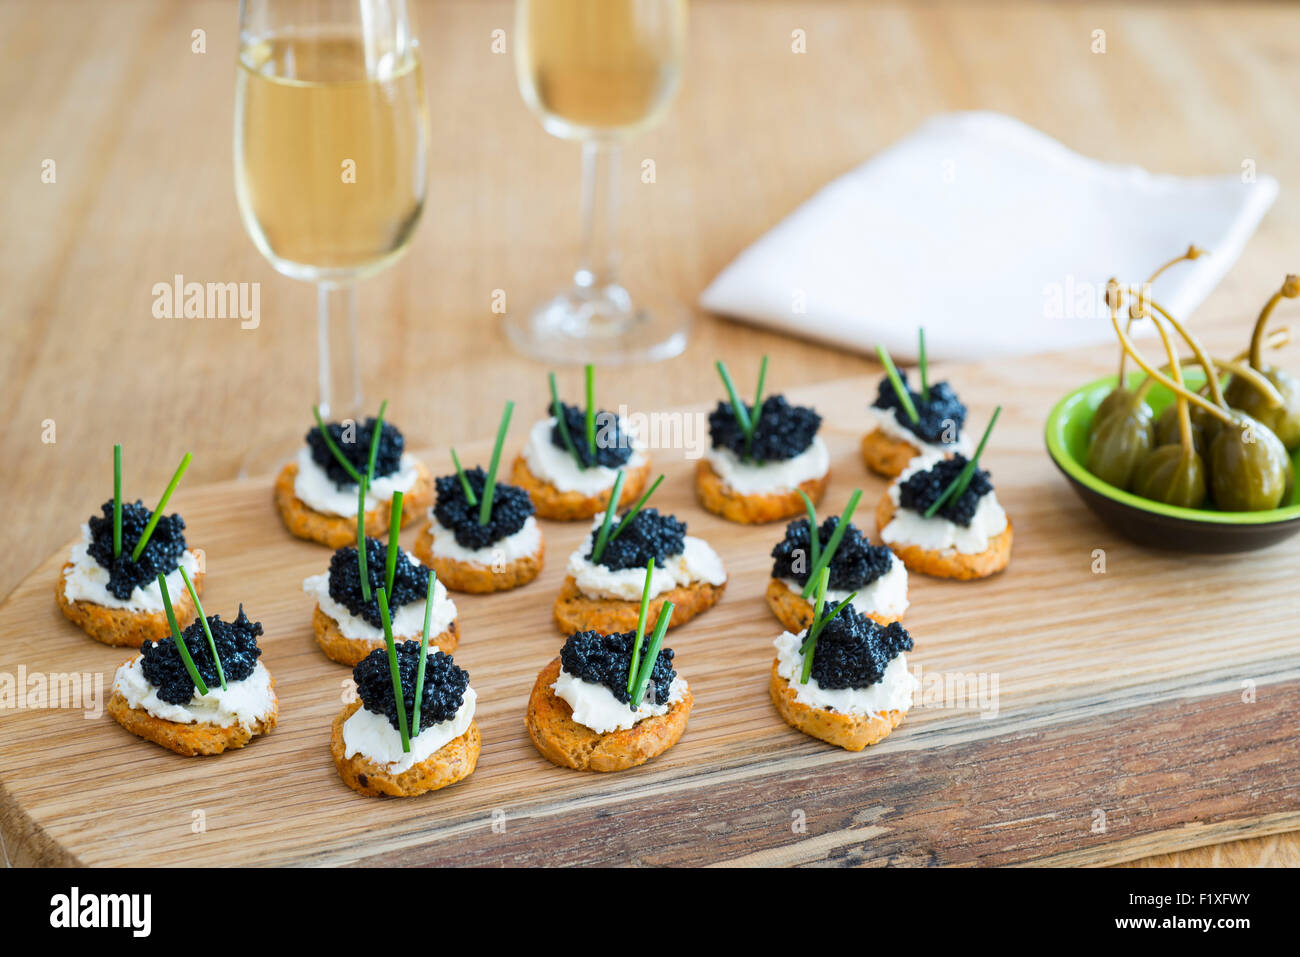 Canapes made from crostini with soft cheese and seaweed 'caviar'. Stock Photo